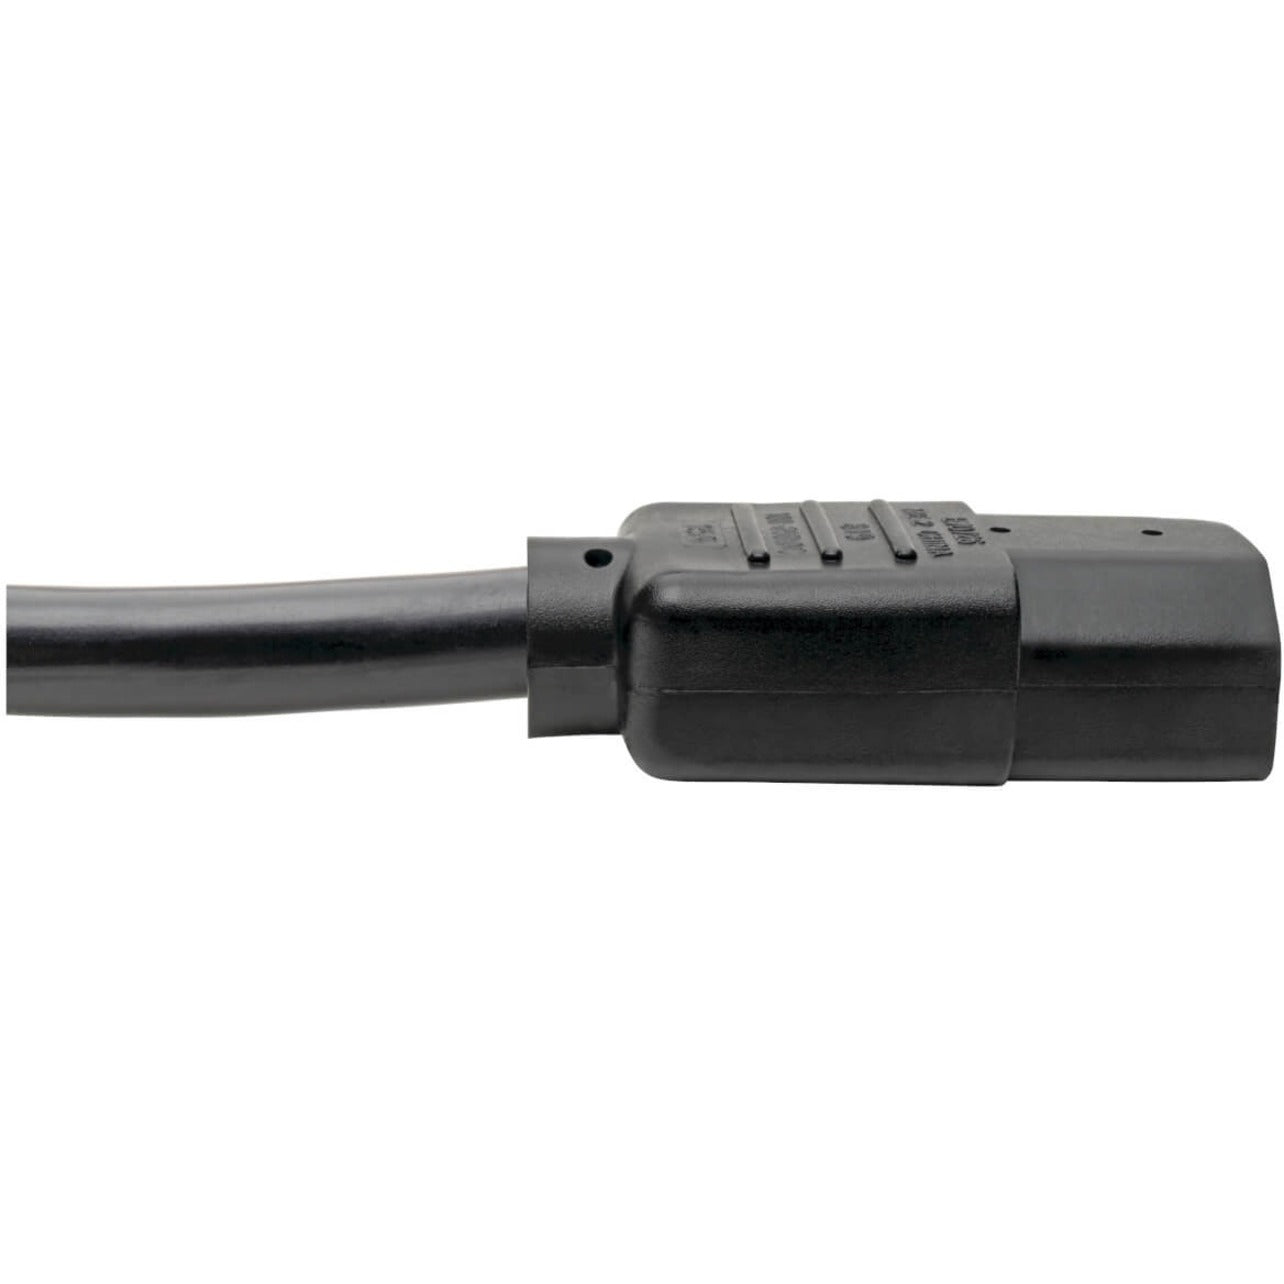 Tripp Lite P019-008 8-ft. Heavy Duty 14AWG Power Cord, 5-15P to C15